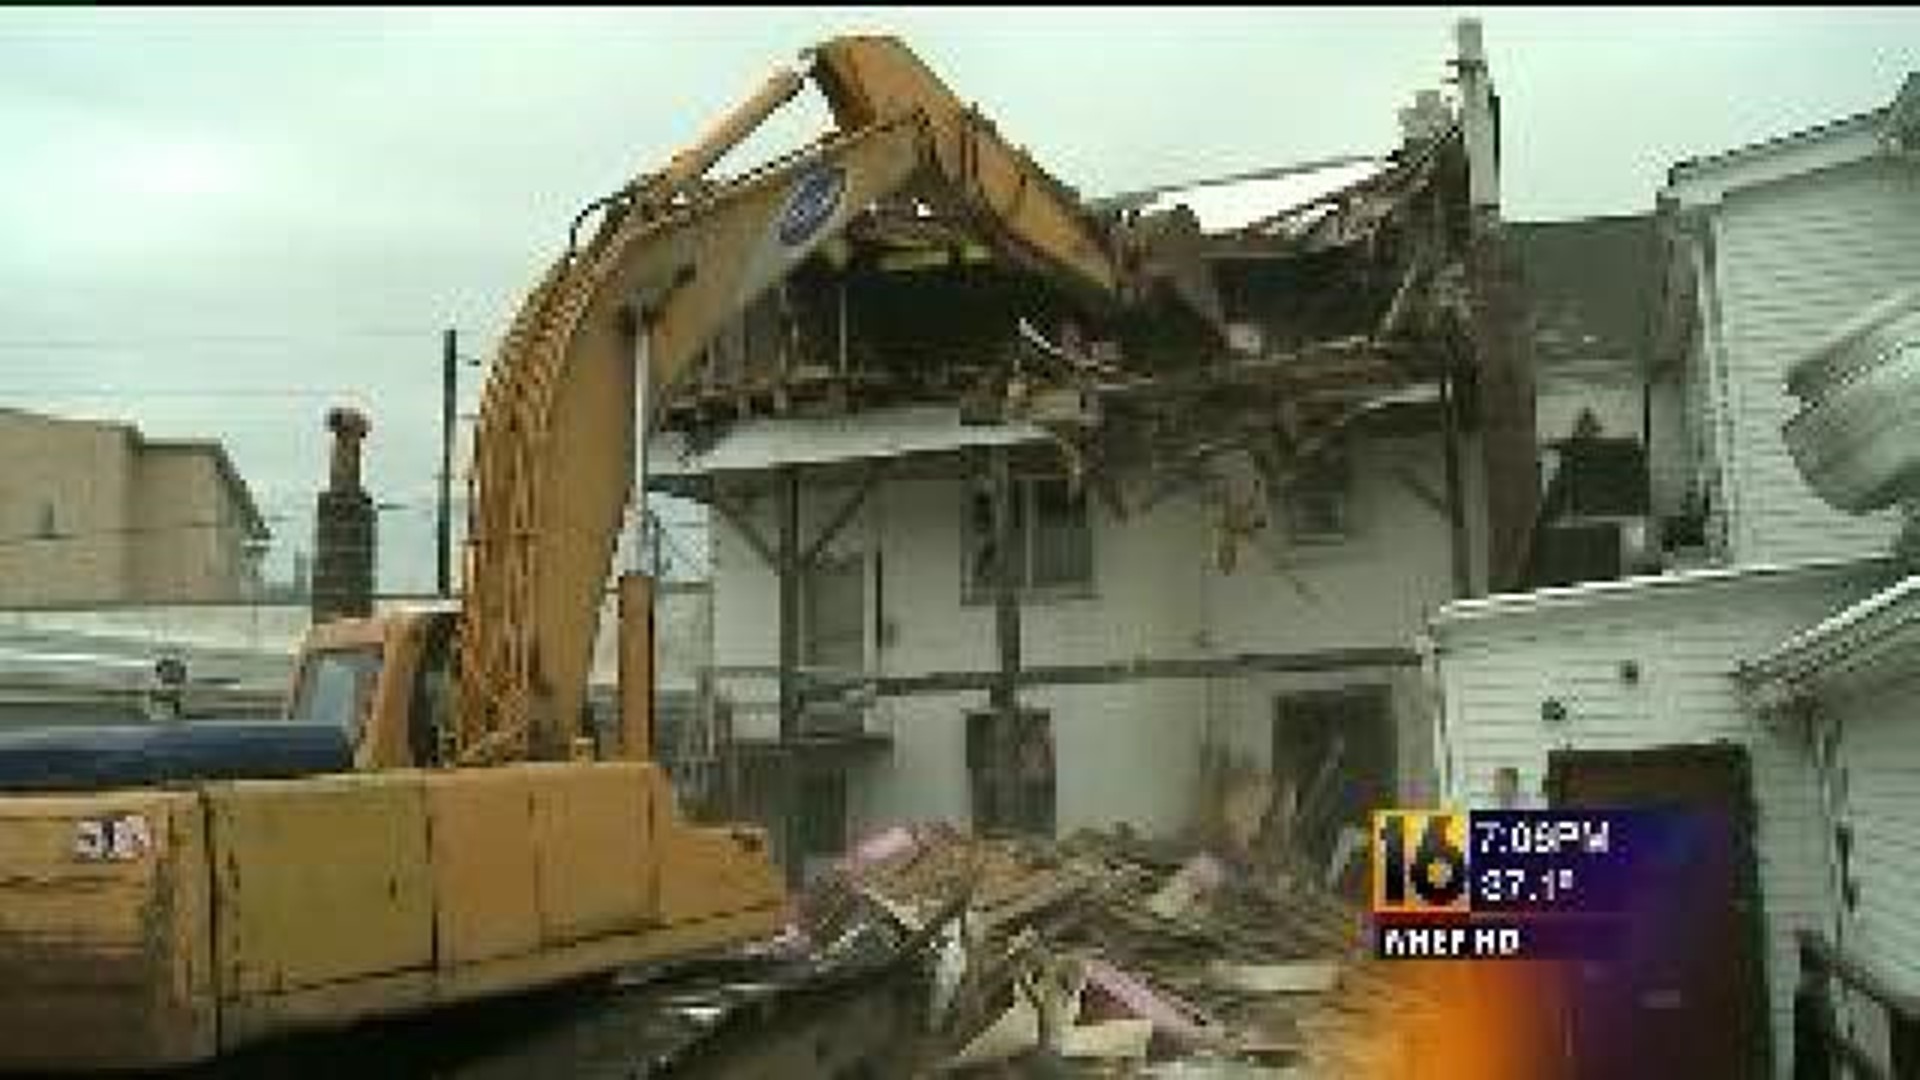 New Business Planned for Demolition Site